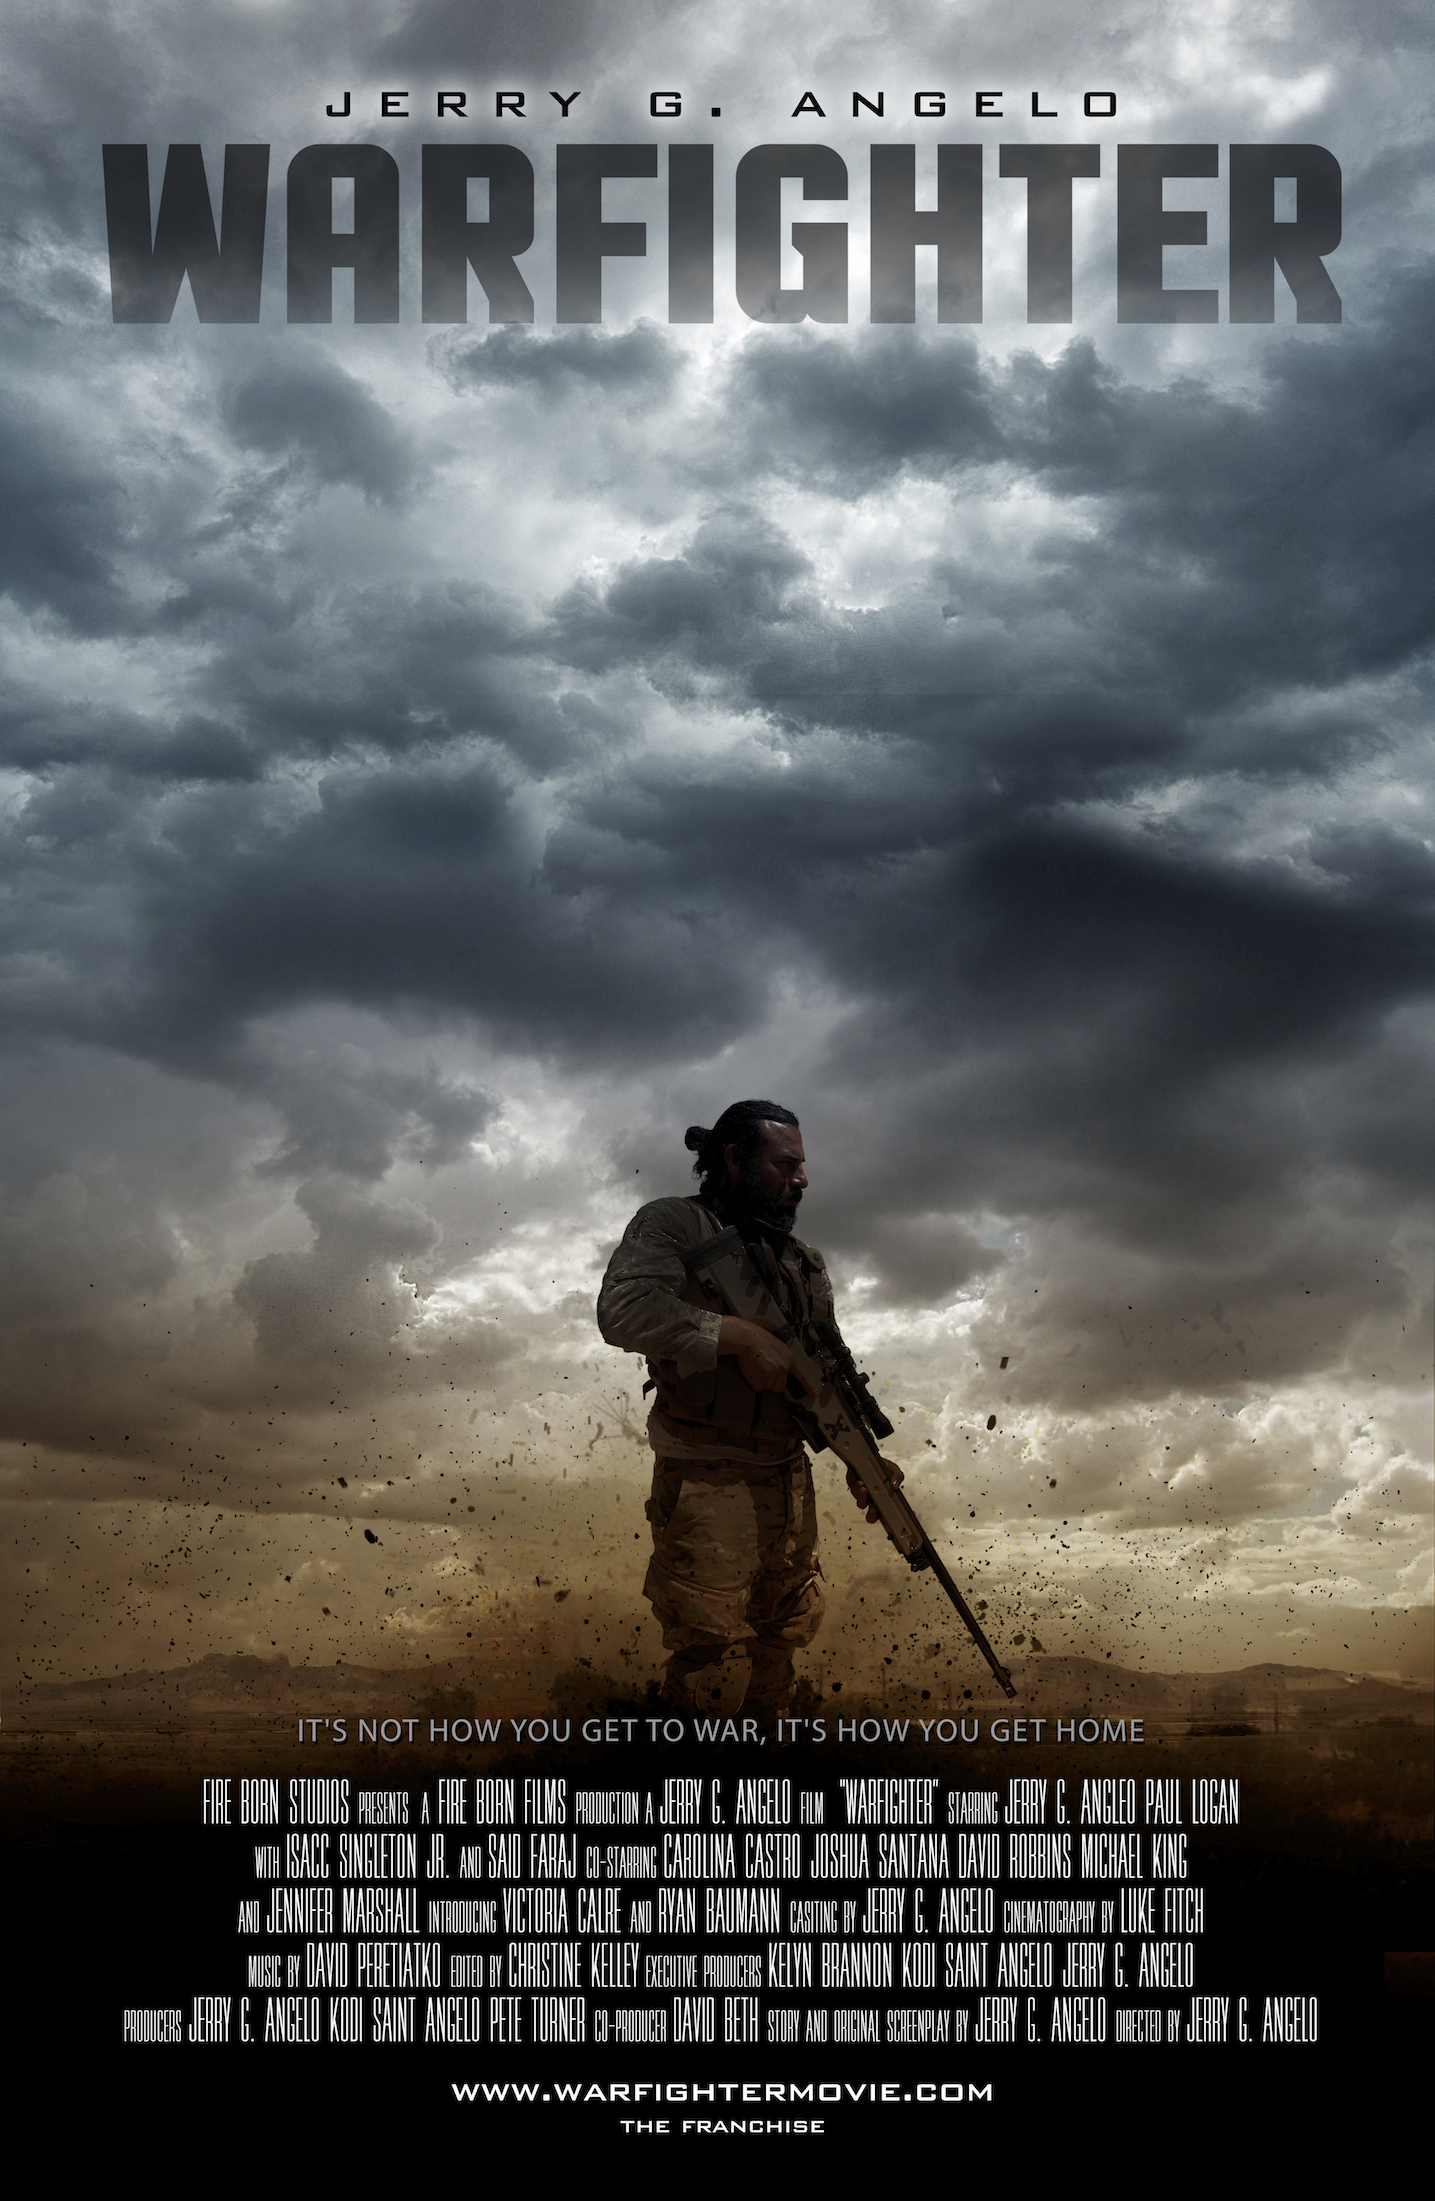 Official WARFIGHTER movie poster (English version).